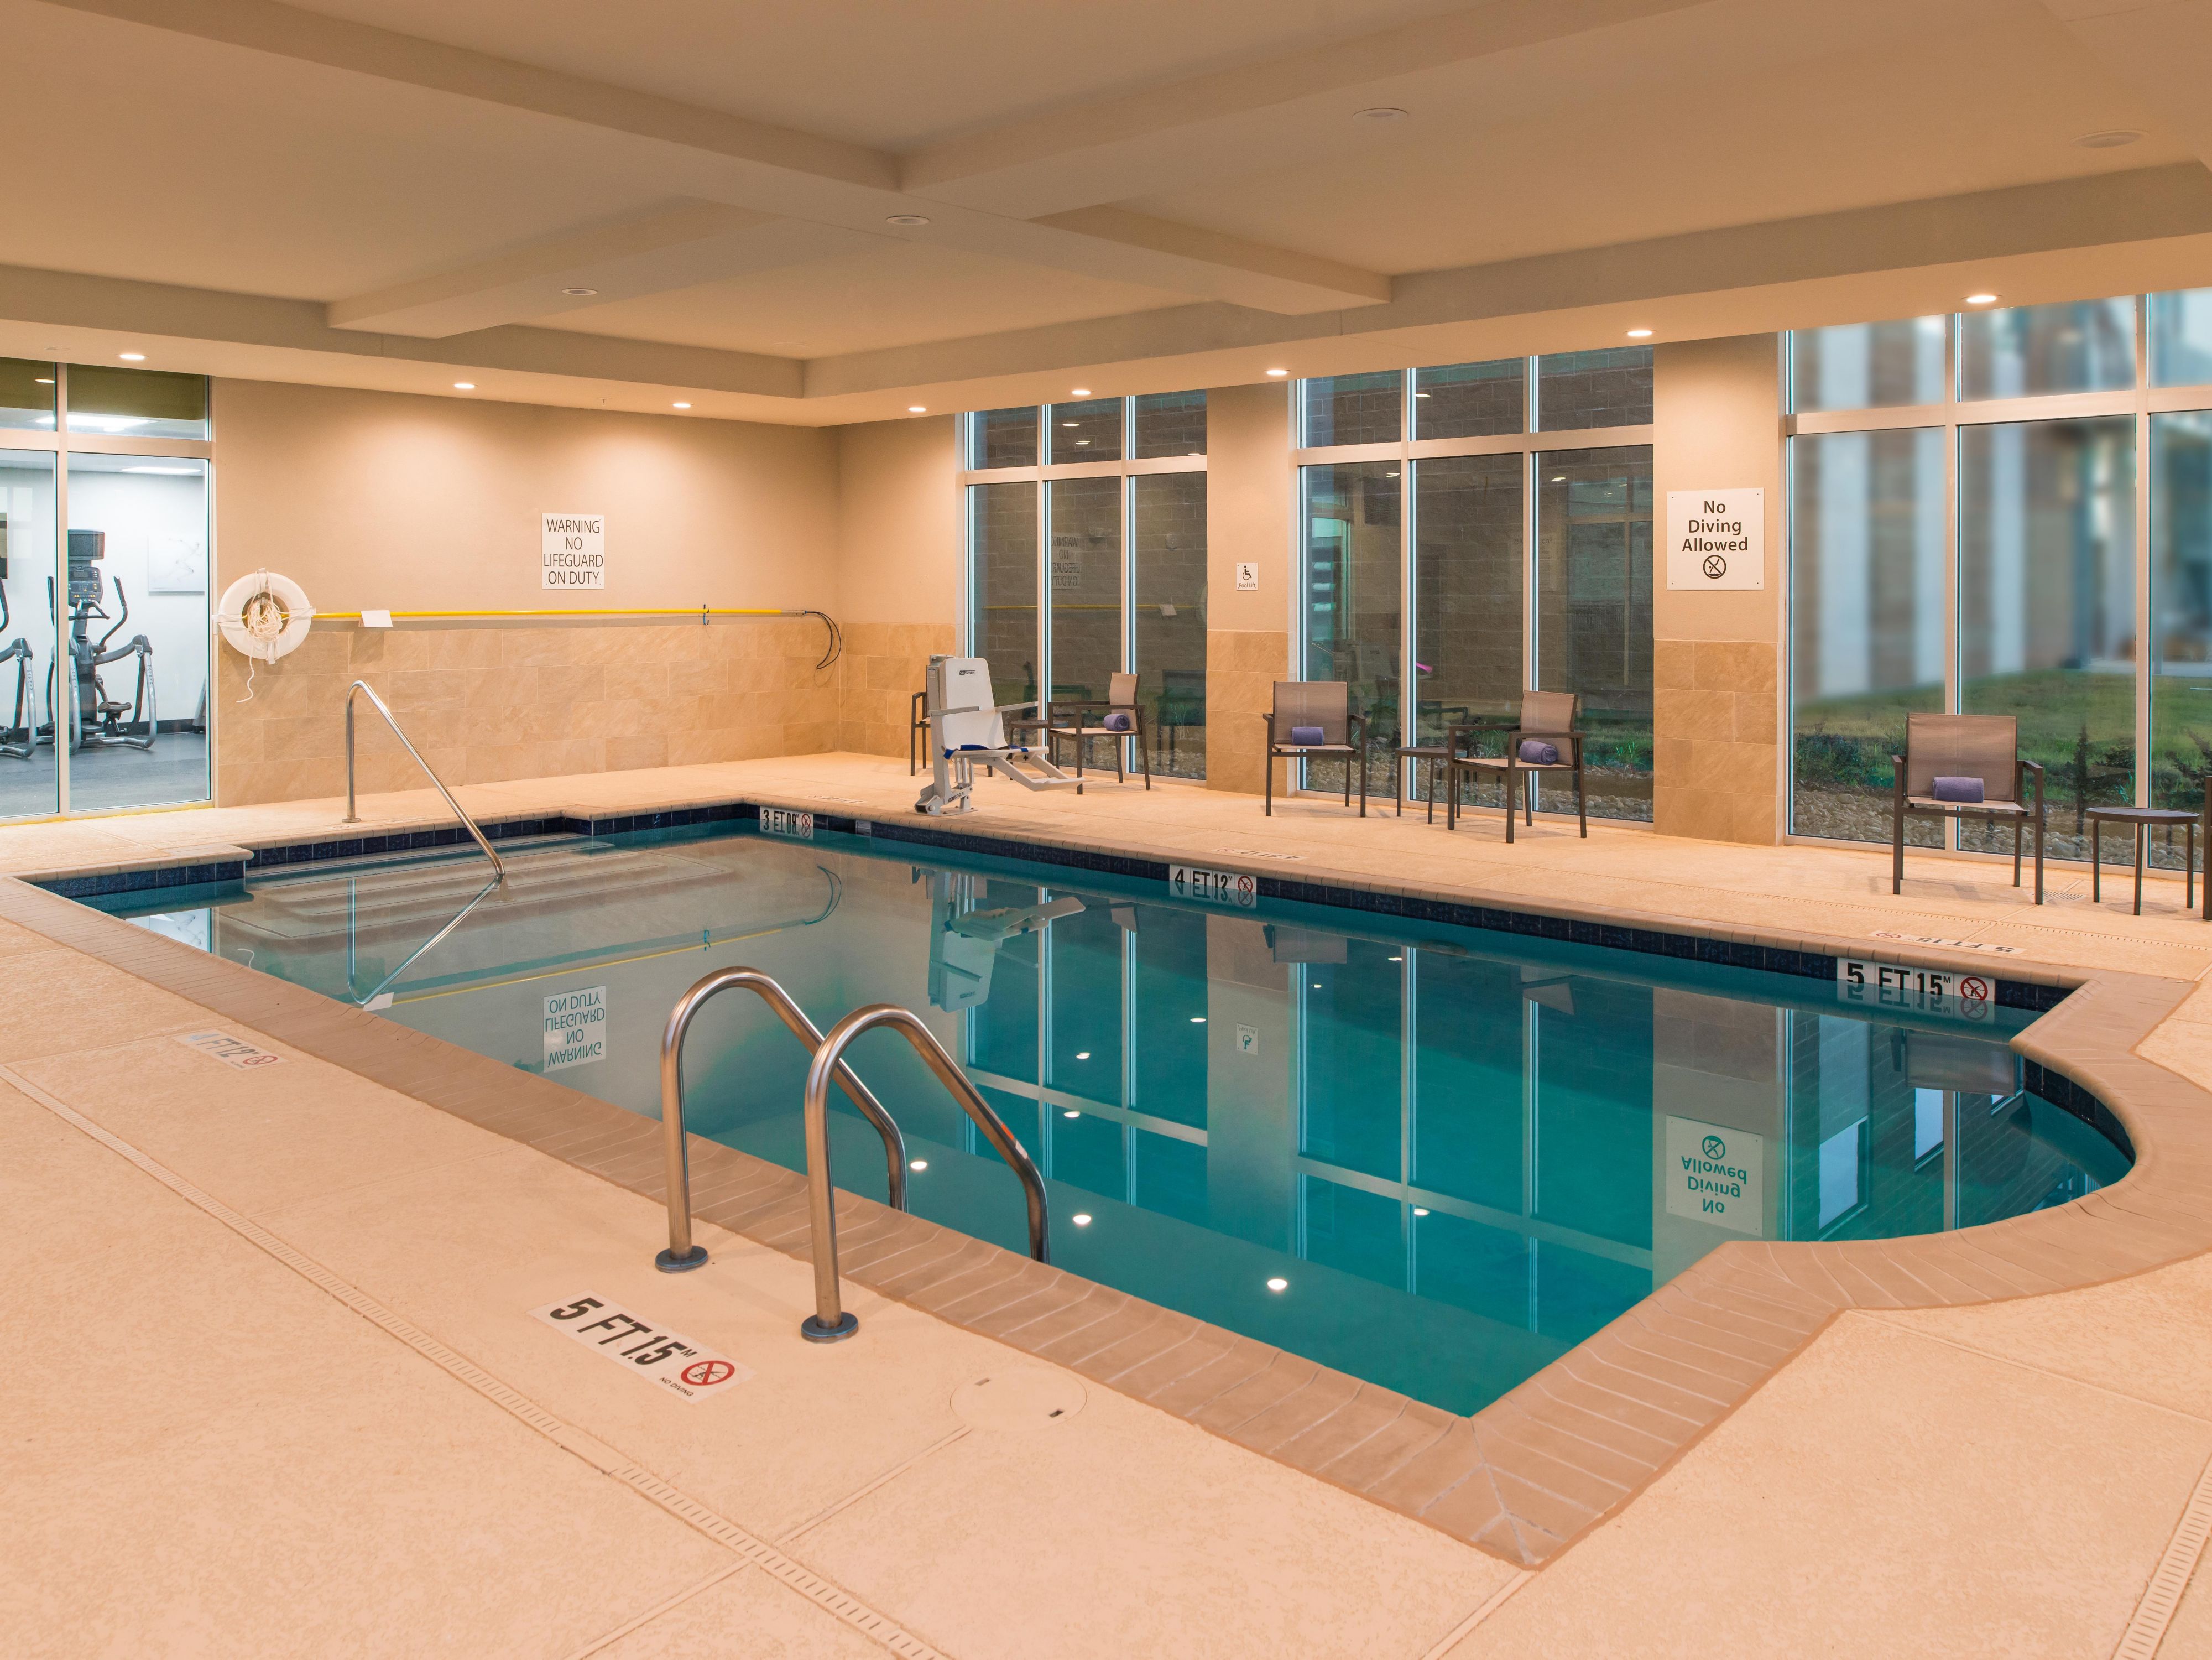 You don’t have to wait on the summer, we offer a heated saltwater pool for a year around experience!